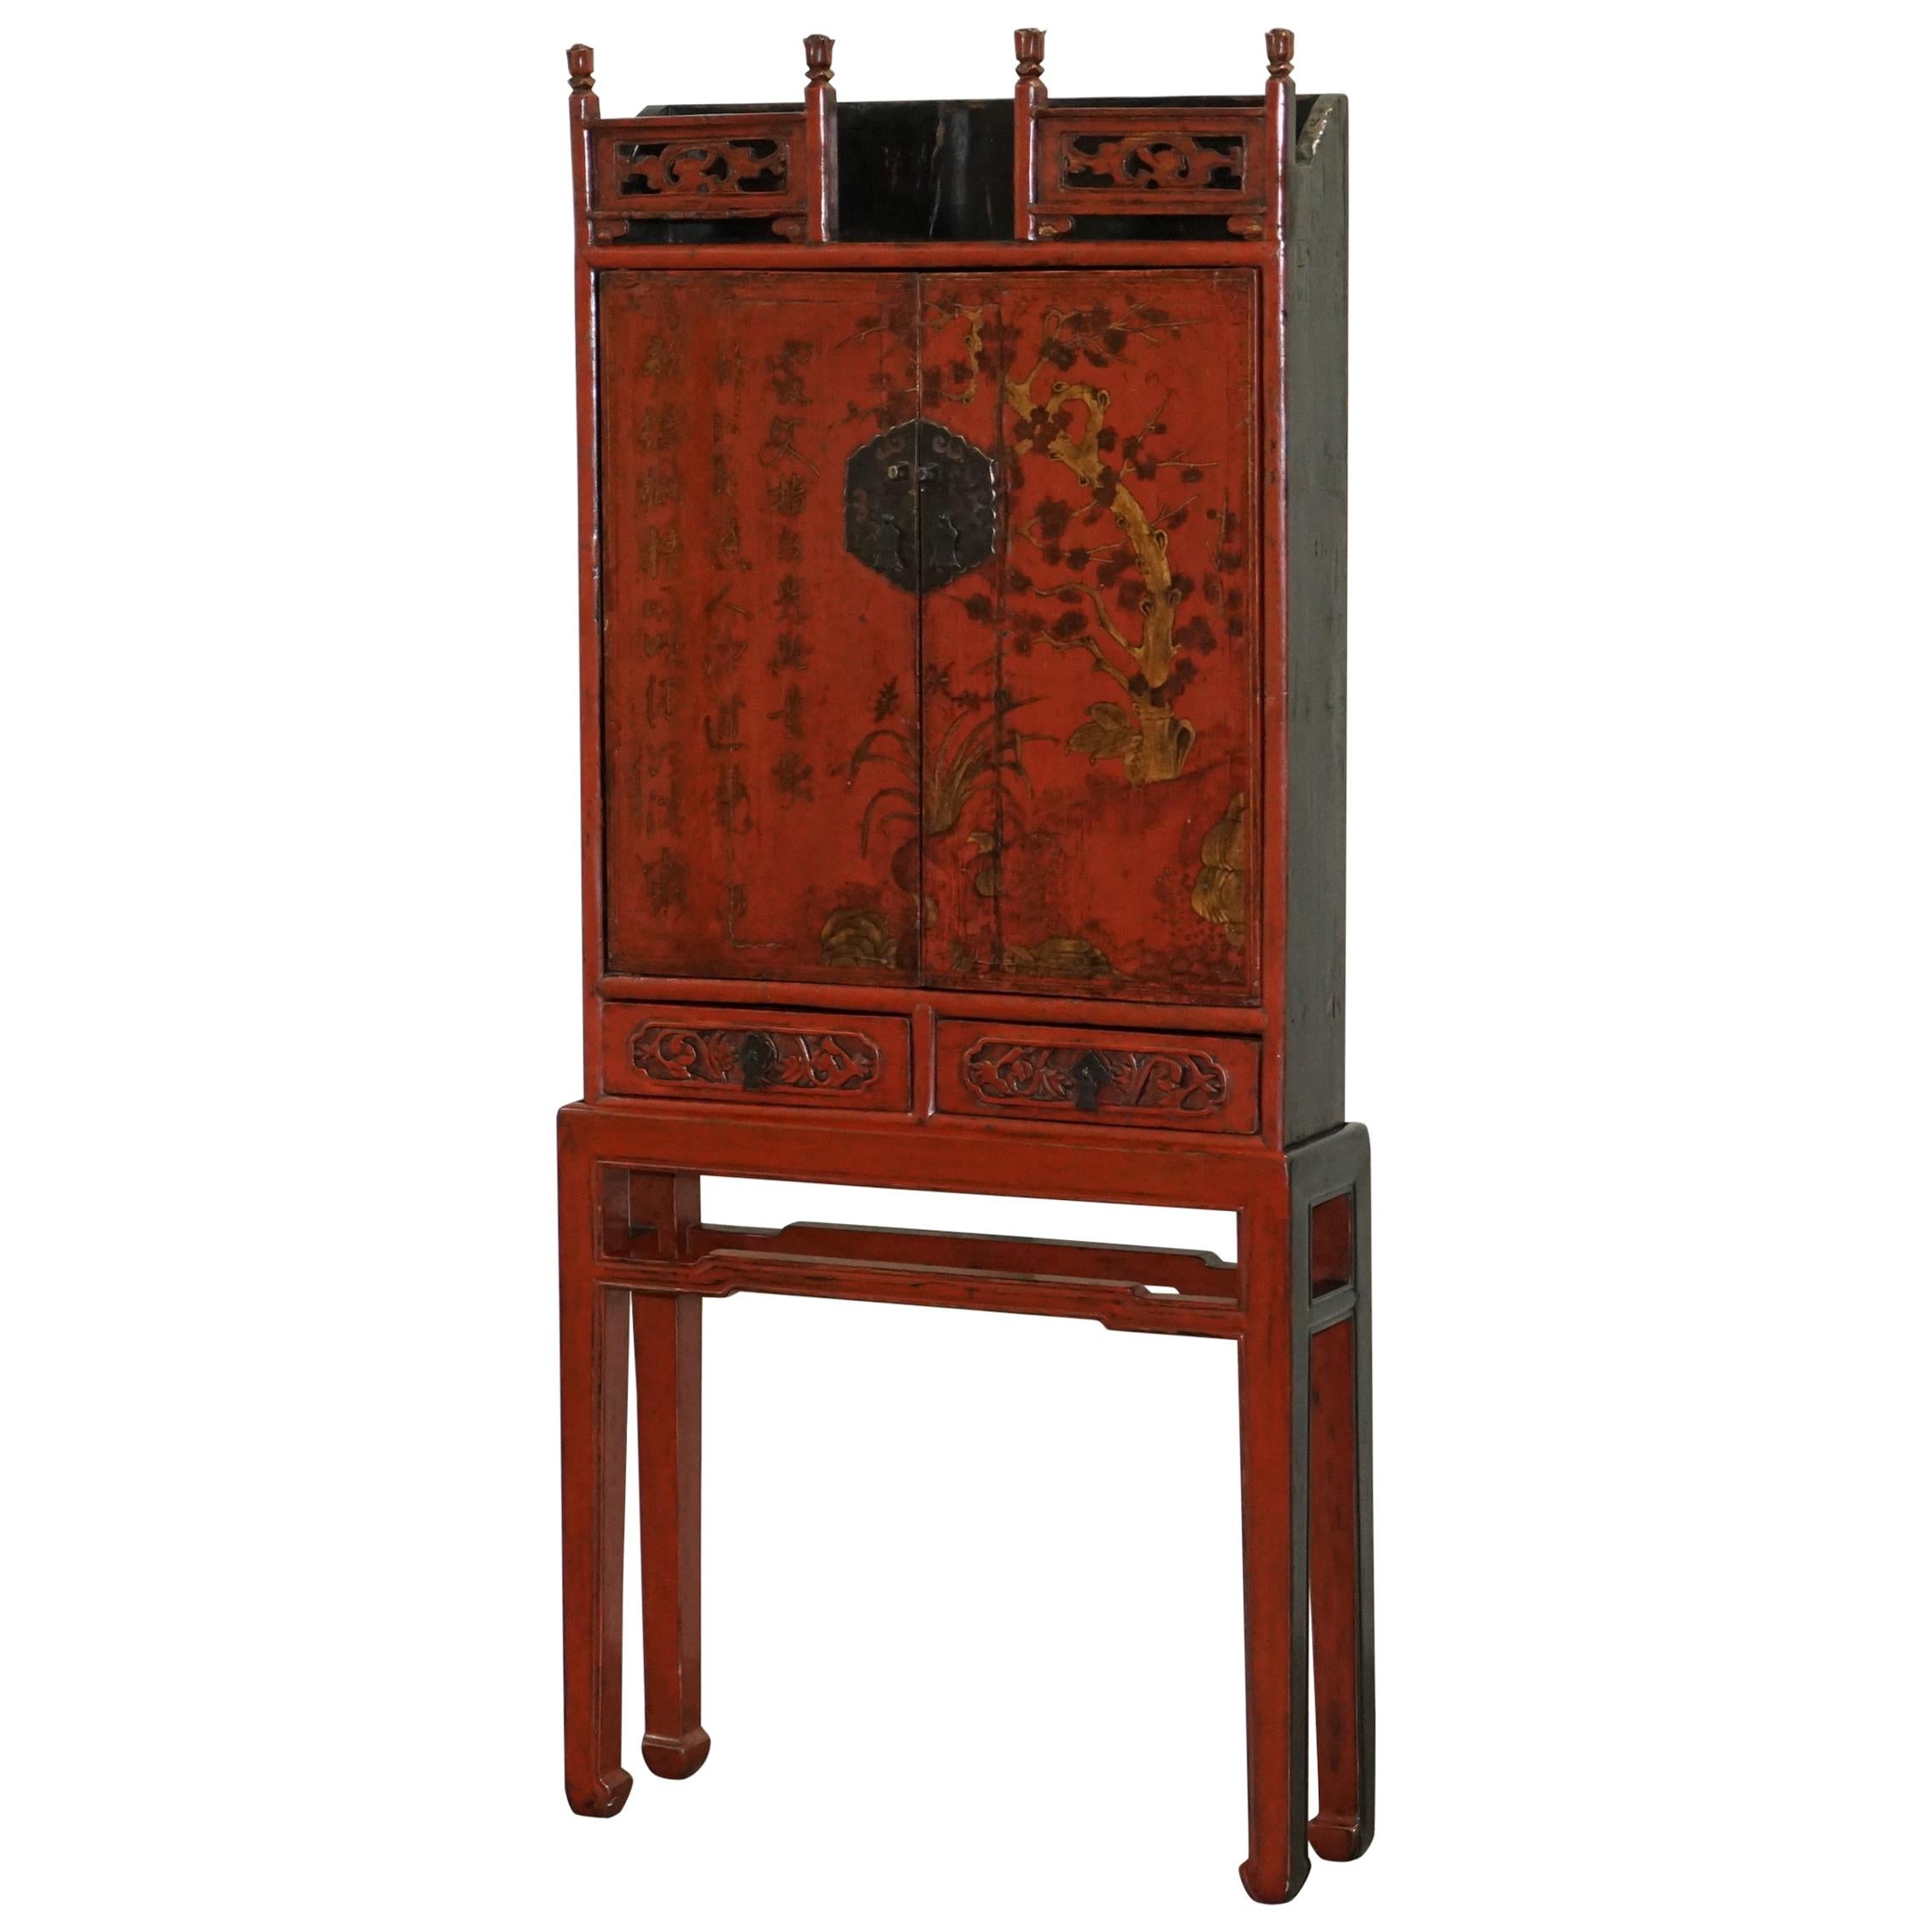 Rare & Exquisite Antique 19th Century Chinese Red Lacquer Cabinet on Stand For Sale